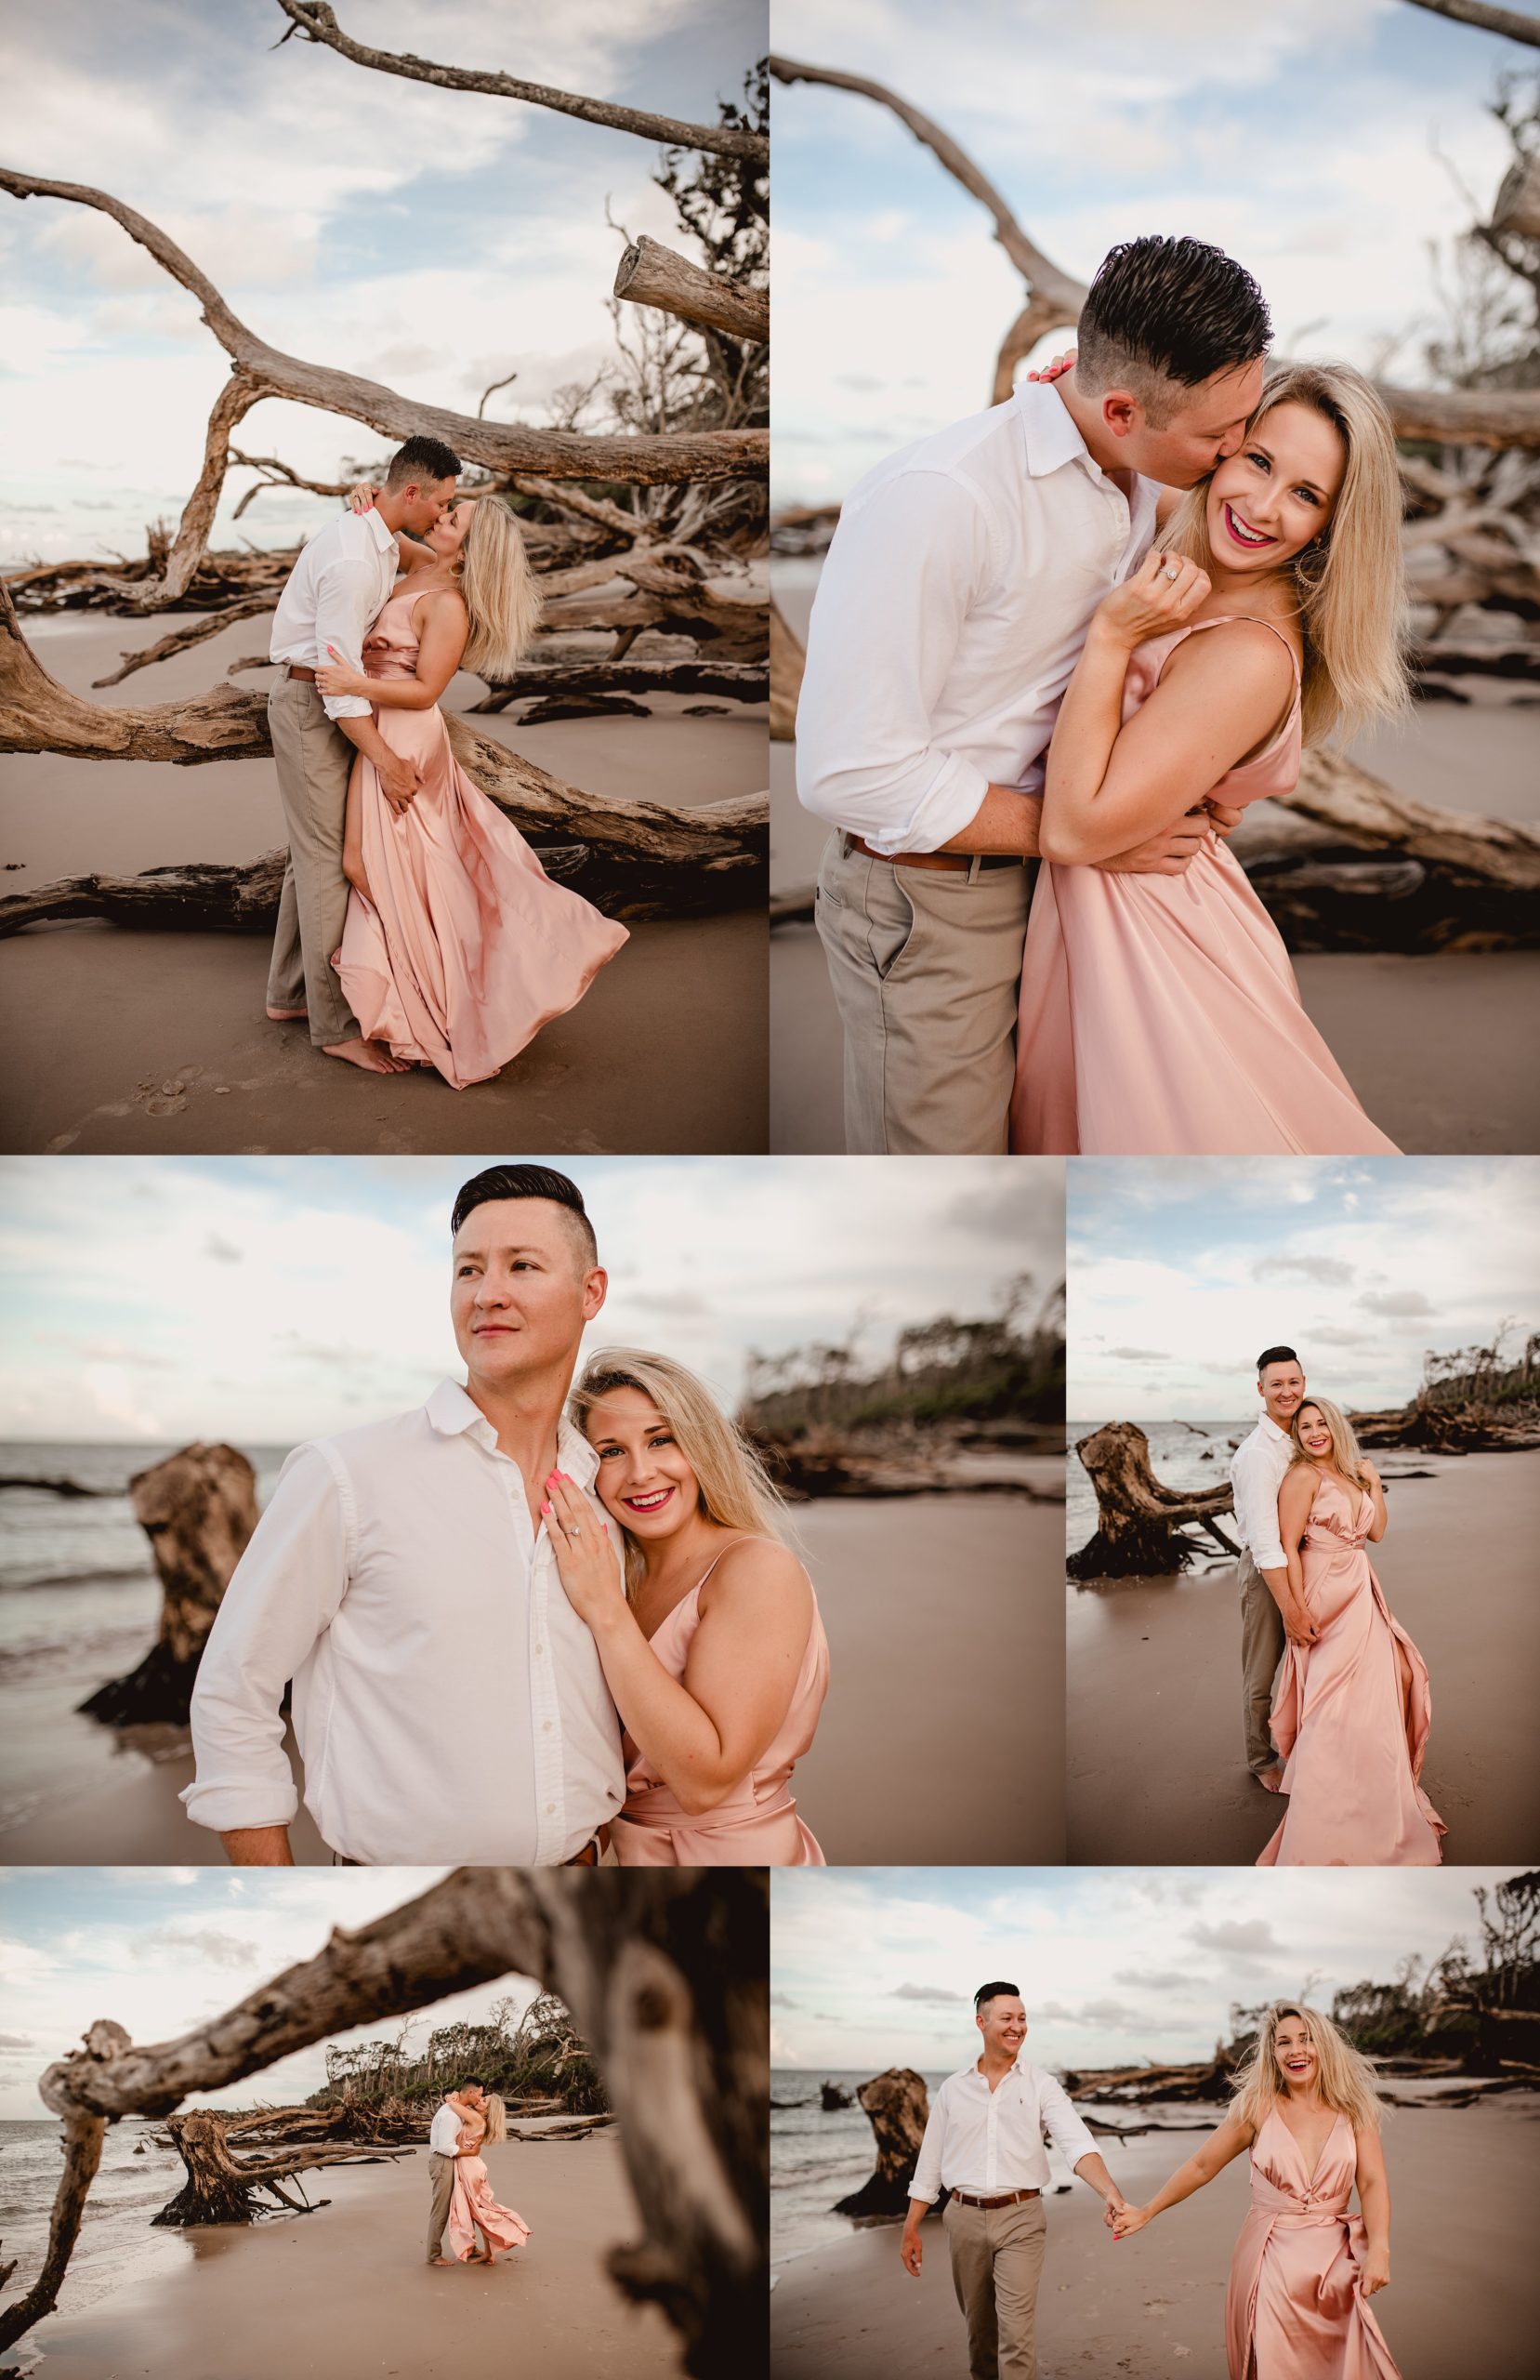 Photos taken on the beach with girl wearing blush colored flowwy dress.